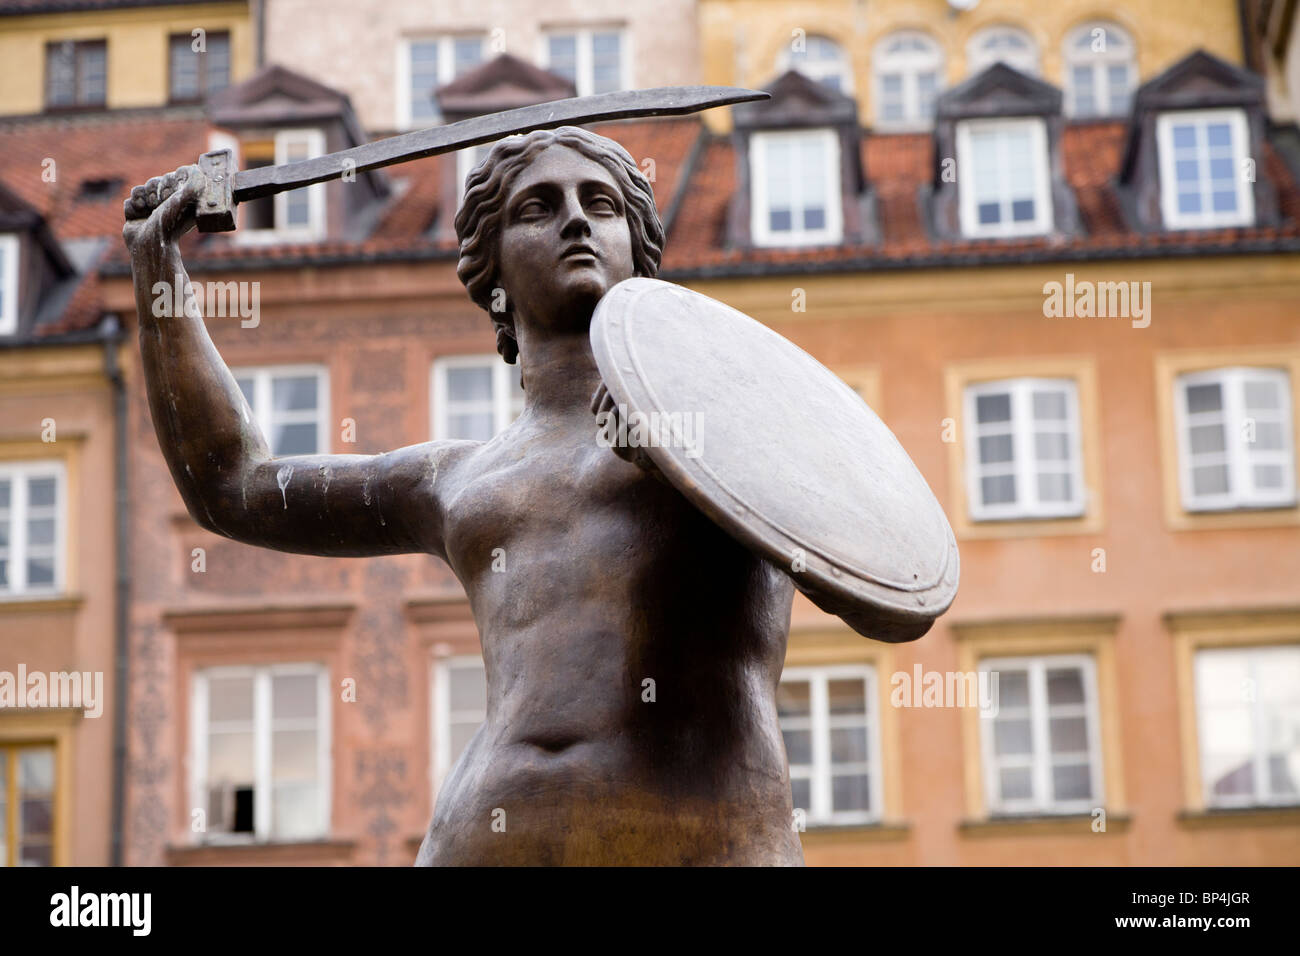 The Warsaw Mermaid statue. Old Town Market Place, Warsaw Poland. Stock Photo